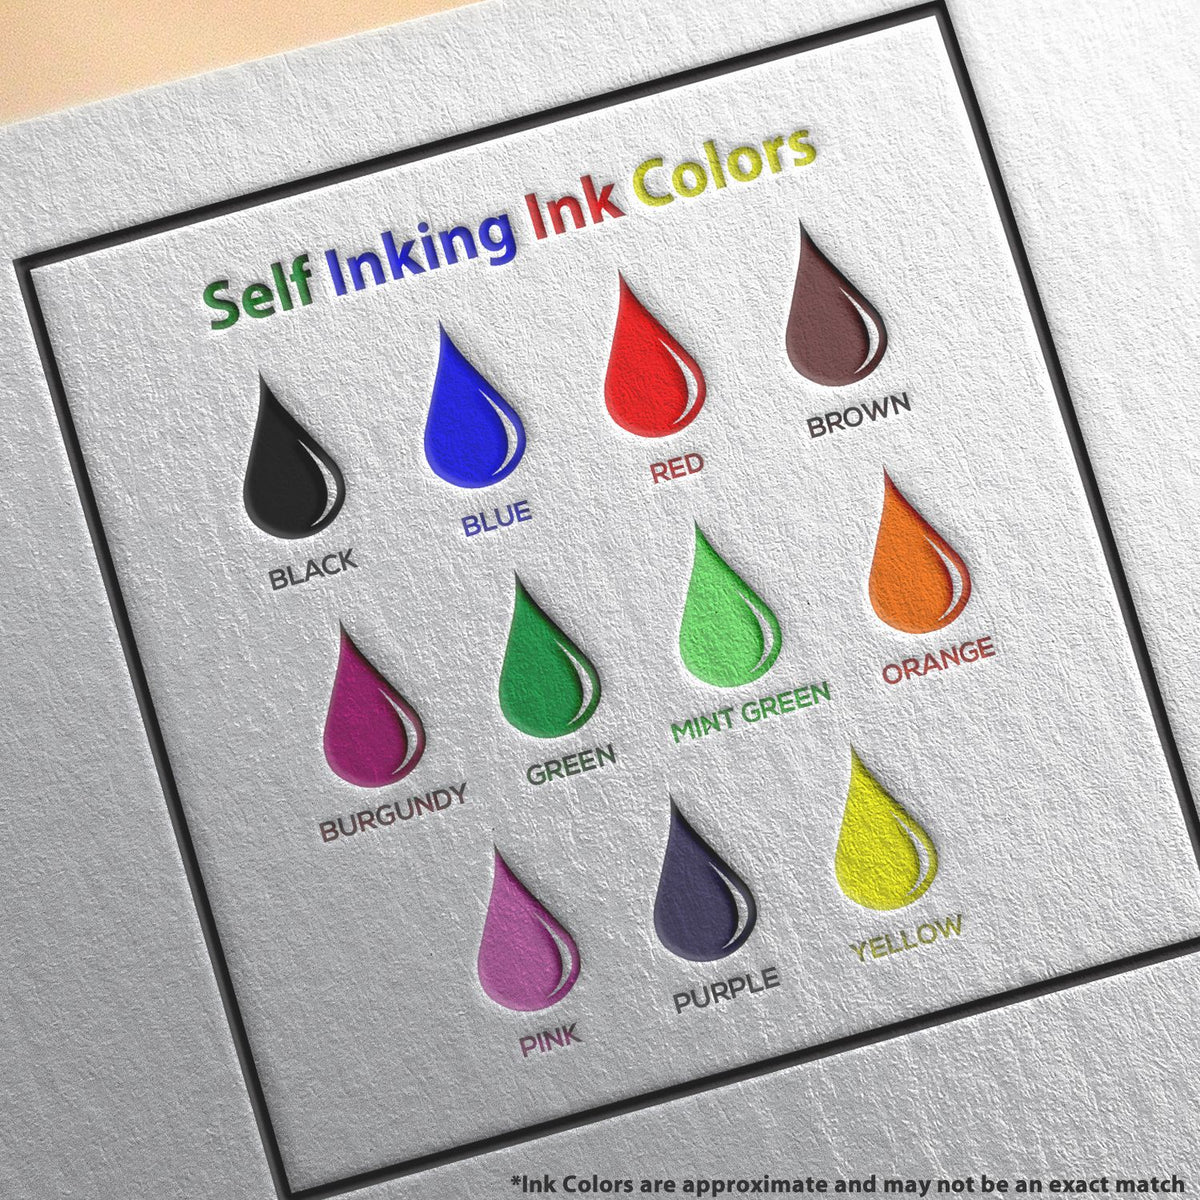 A picture showing the different ink colors or hues available for the Self-Inking Iowa Landscape Architect Stamp product.